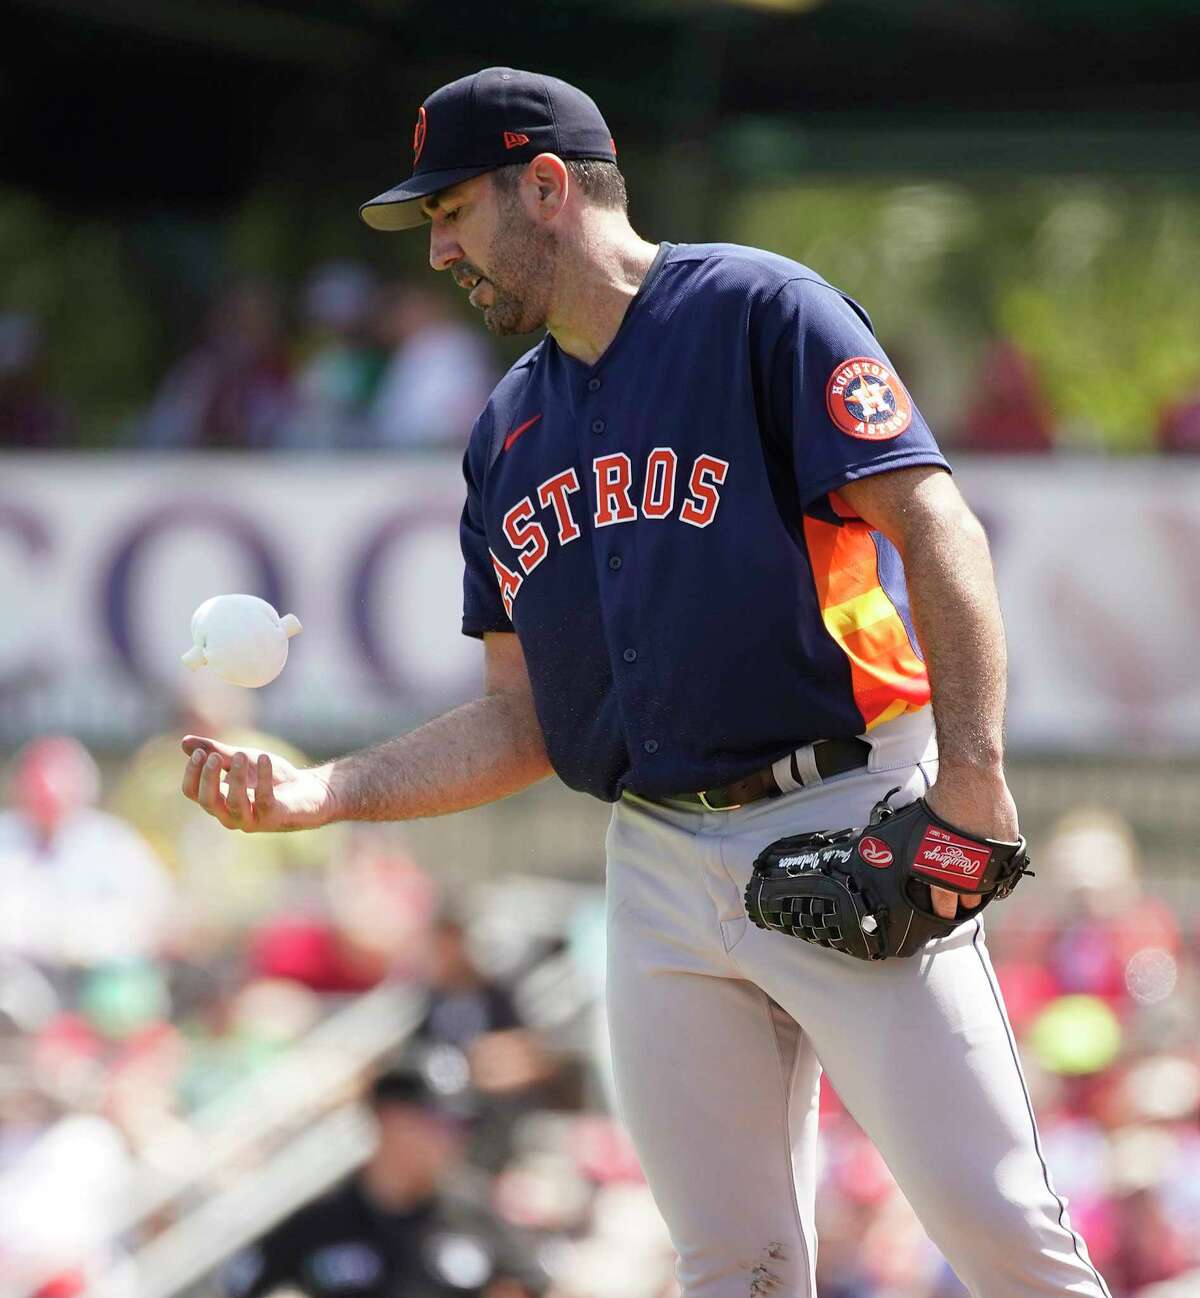 Houston Astros pitcher Justin Verlander (35) pitches in the second inning during an MLB spring training game at Roger Dean Chevrolet Stadium on Friday, March 18, 2022 in Jupiter.